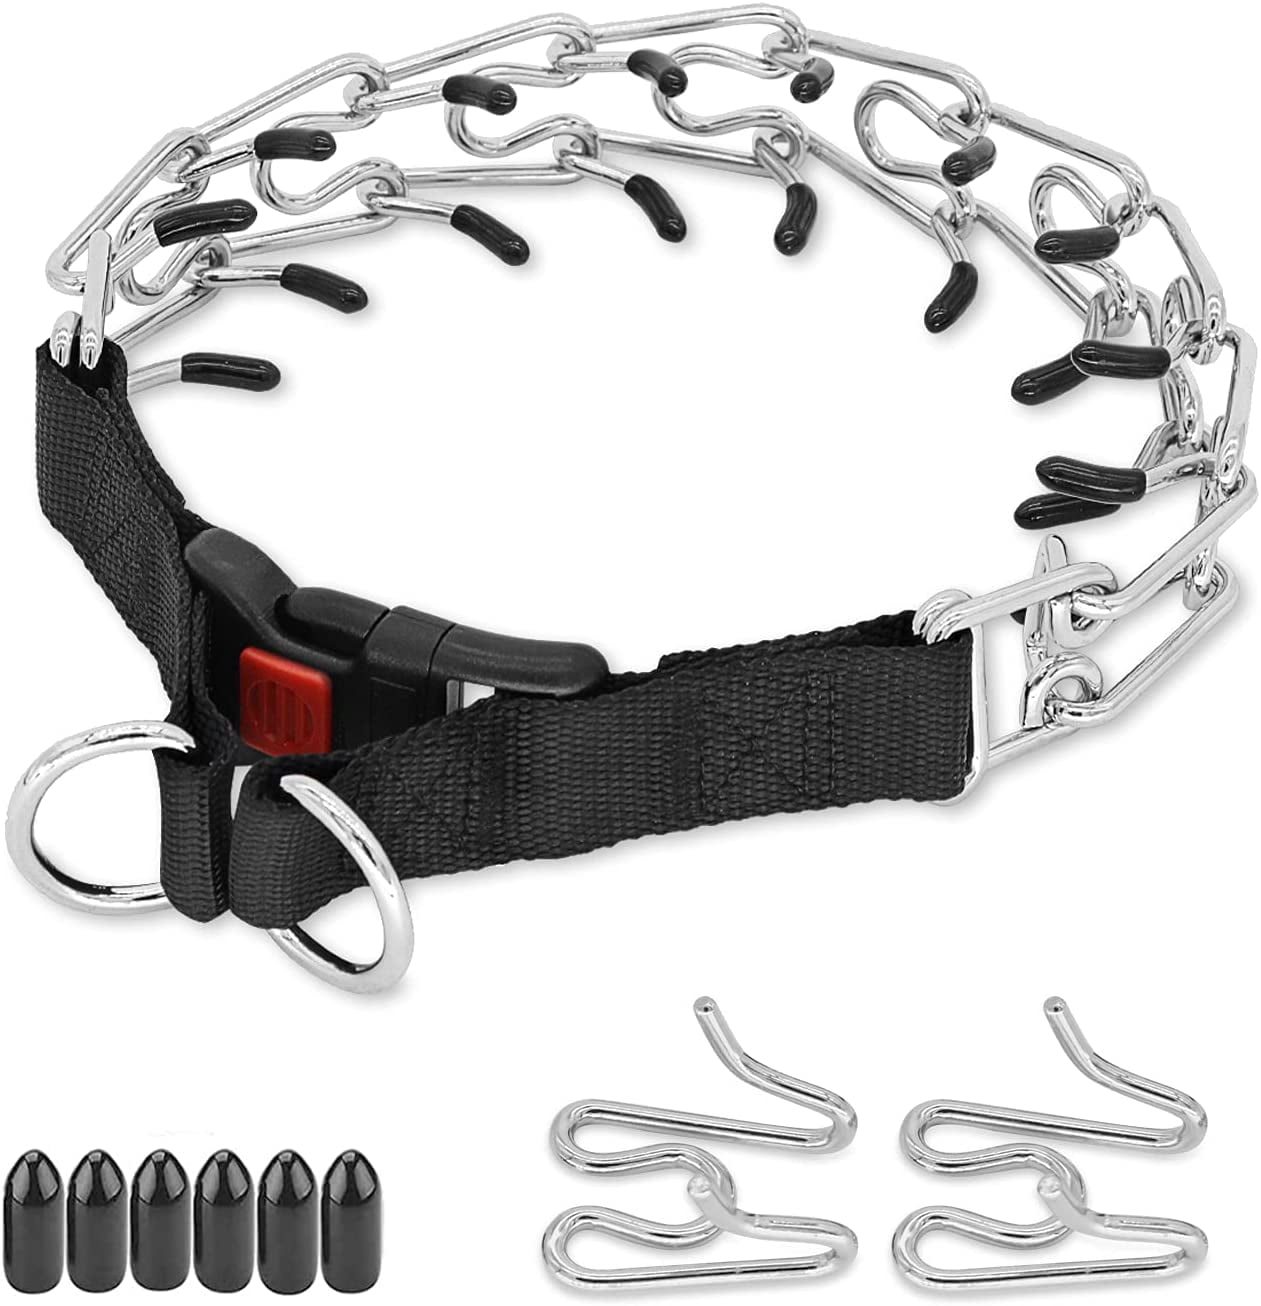 Dog Prong Collar Quick Release Snap Buckle Pinch Training Collar Adjustable Stainless Steel Links Pinch Collar Dog Choker Training Collar with Comfort Rubber Tips 